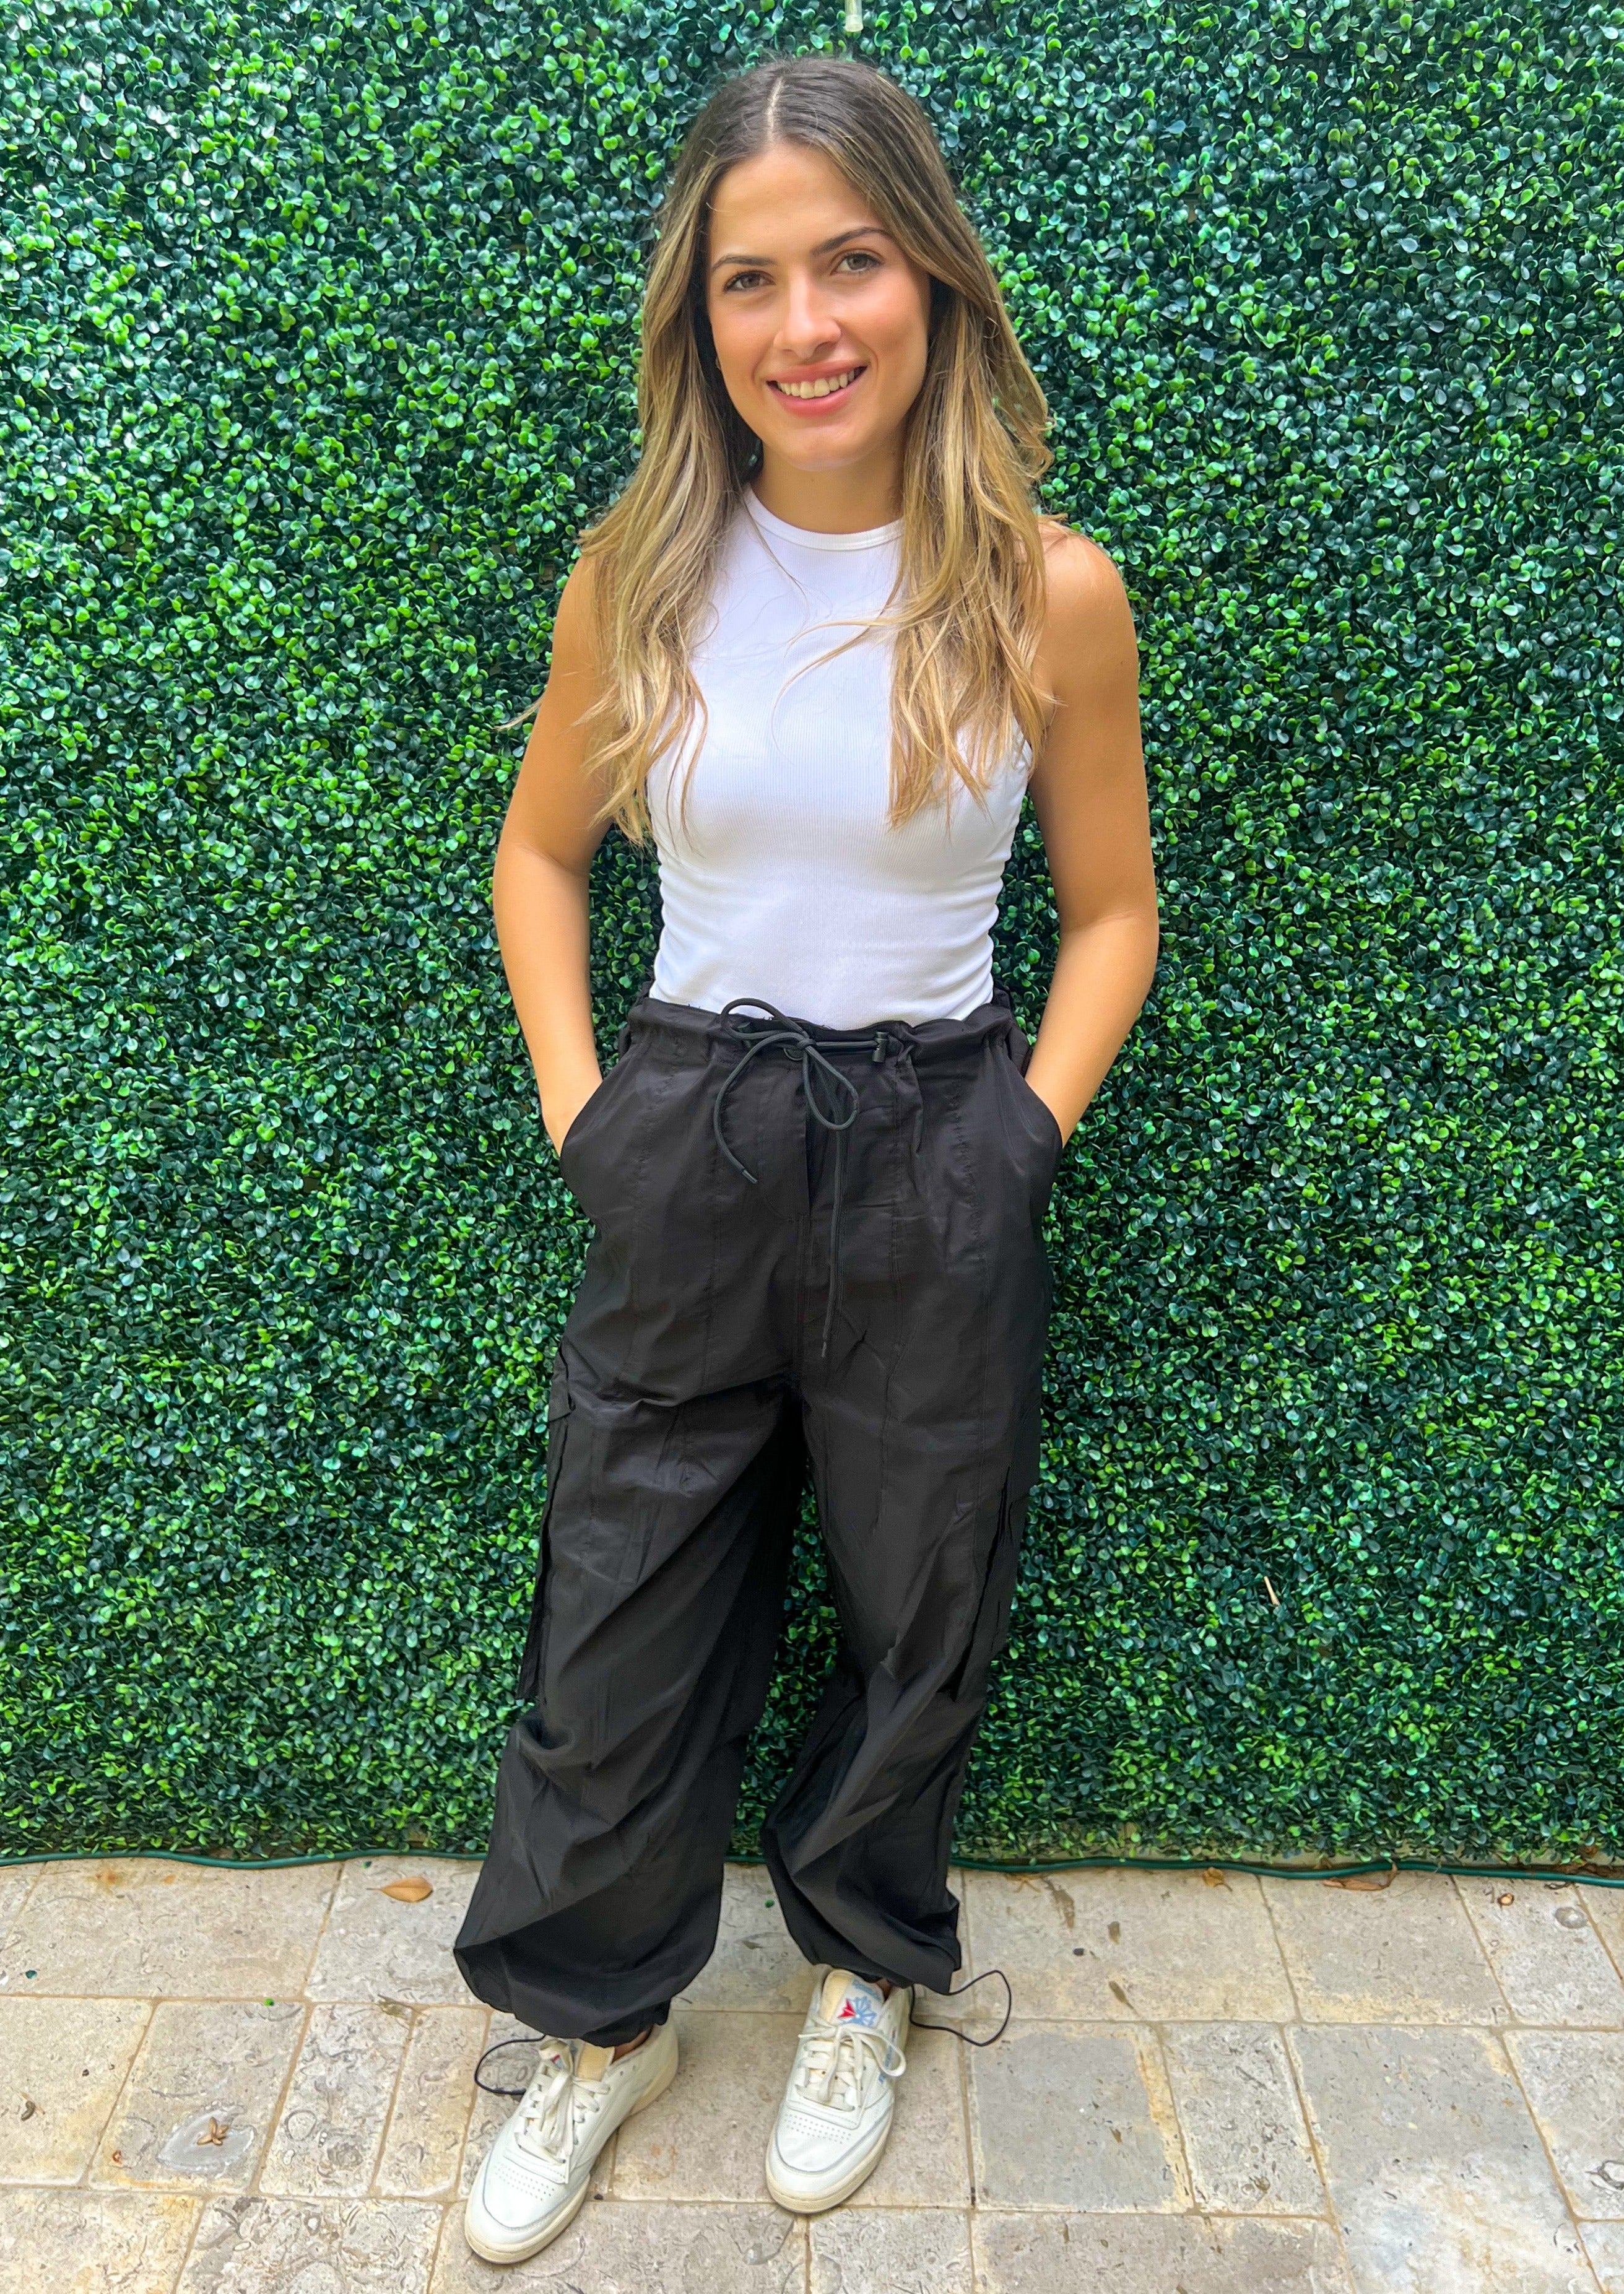 High waisted elastic waist band black cargo pants with pockets and side pockets. Bottom of the pants feature elastic so they can be worn loose or adjusted.